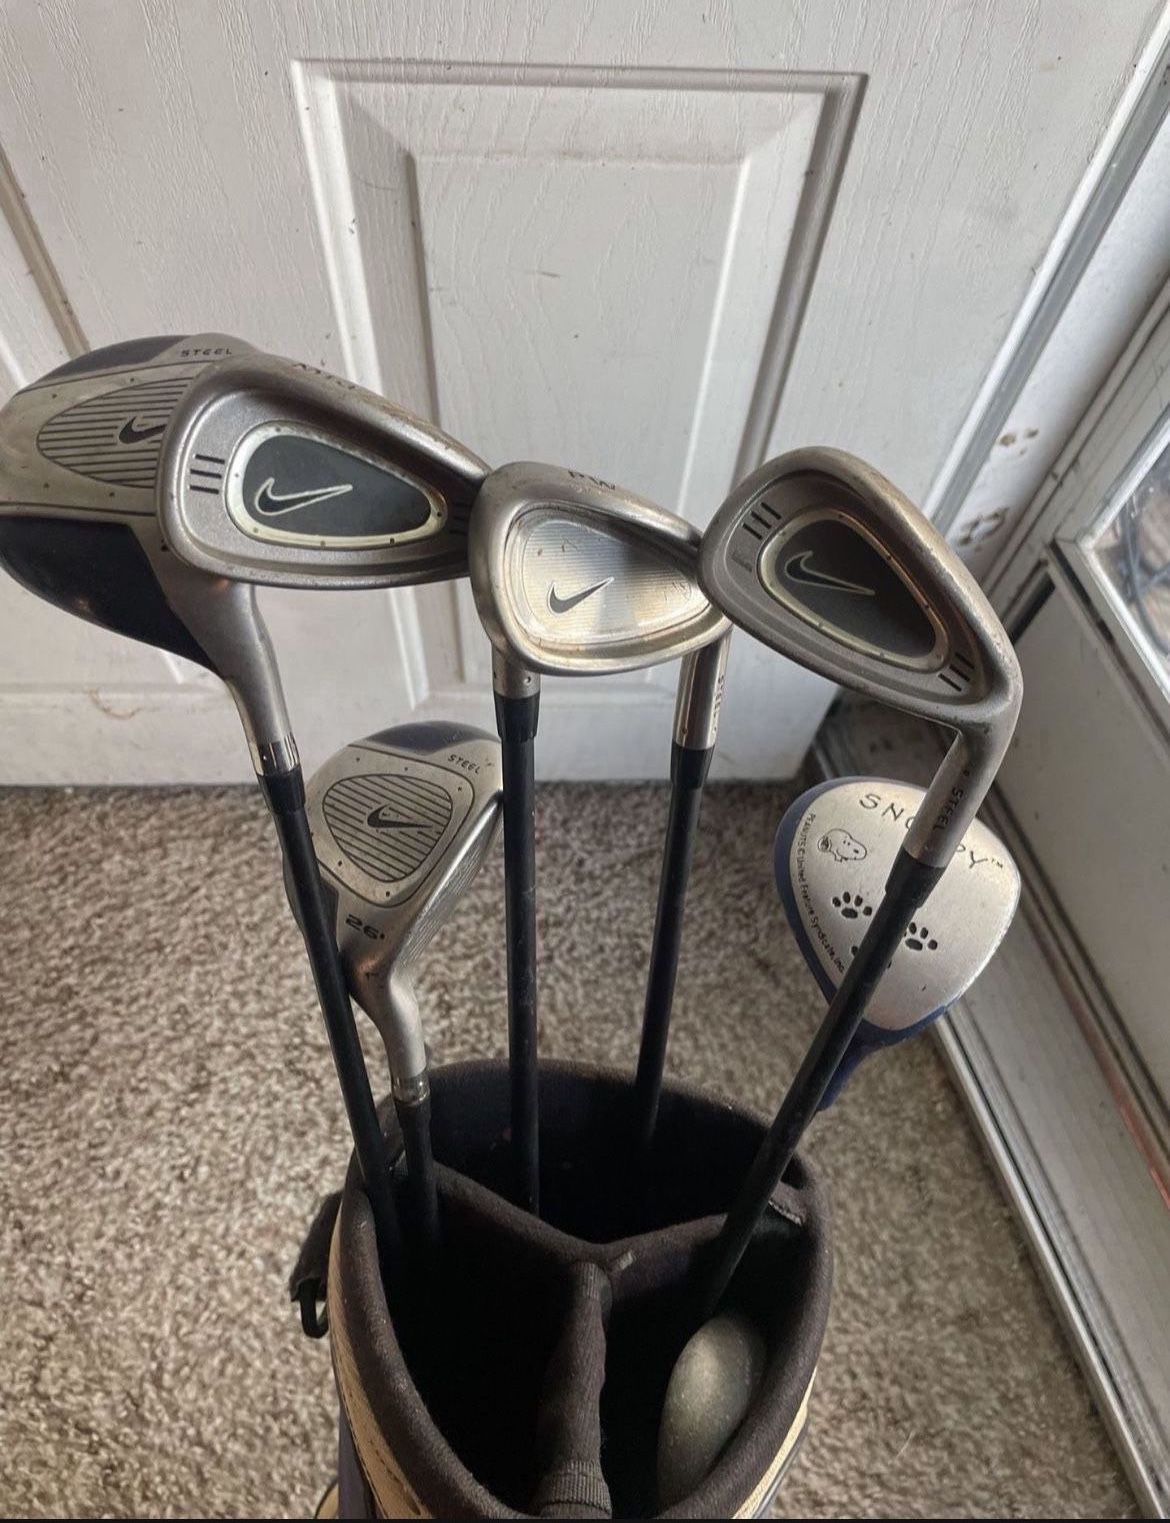 Lao impliceren gitaar Nike Golf Club Set With Bag for Sale in Channelview, TX - OfferUp